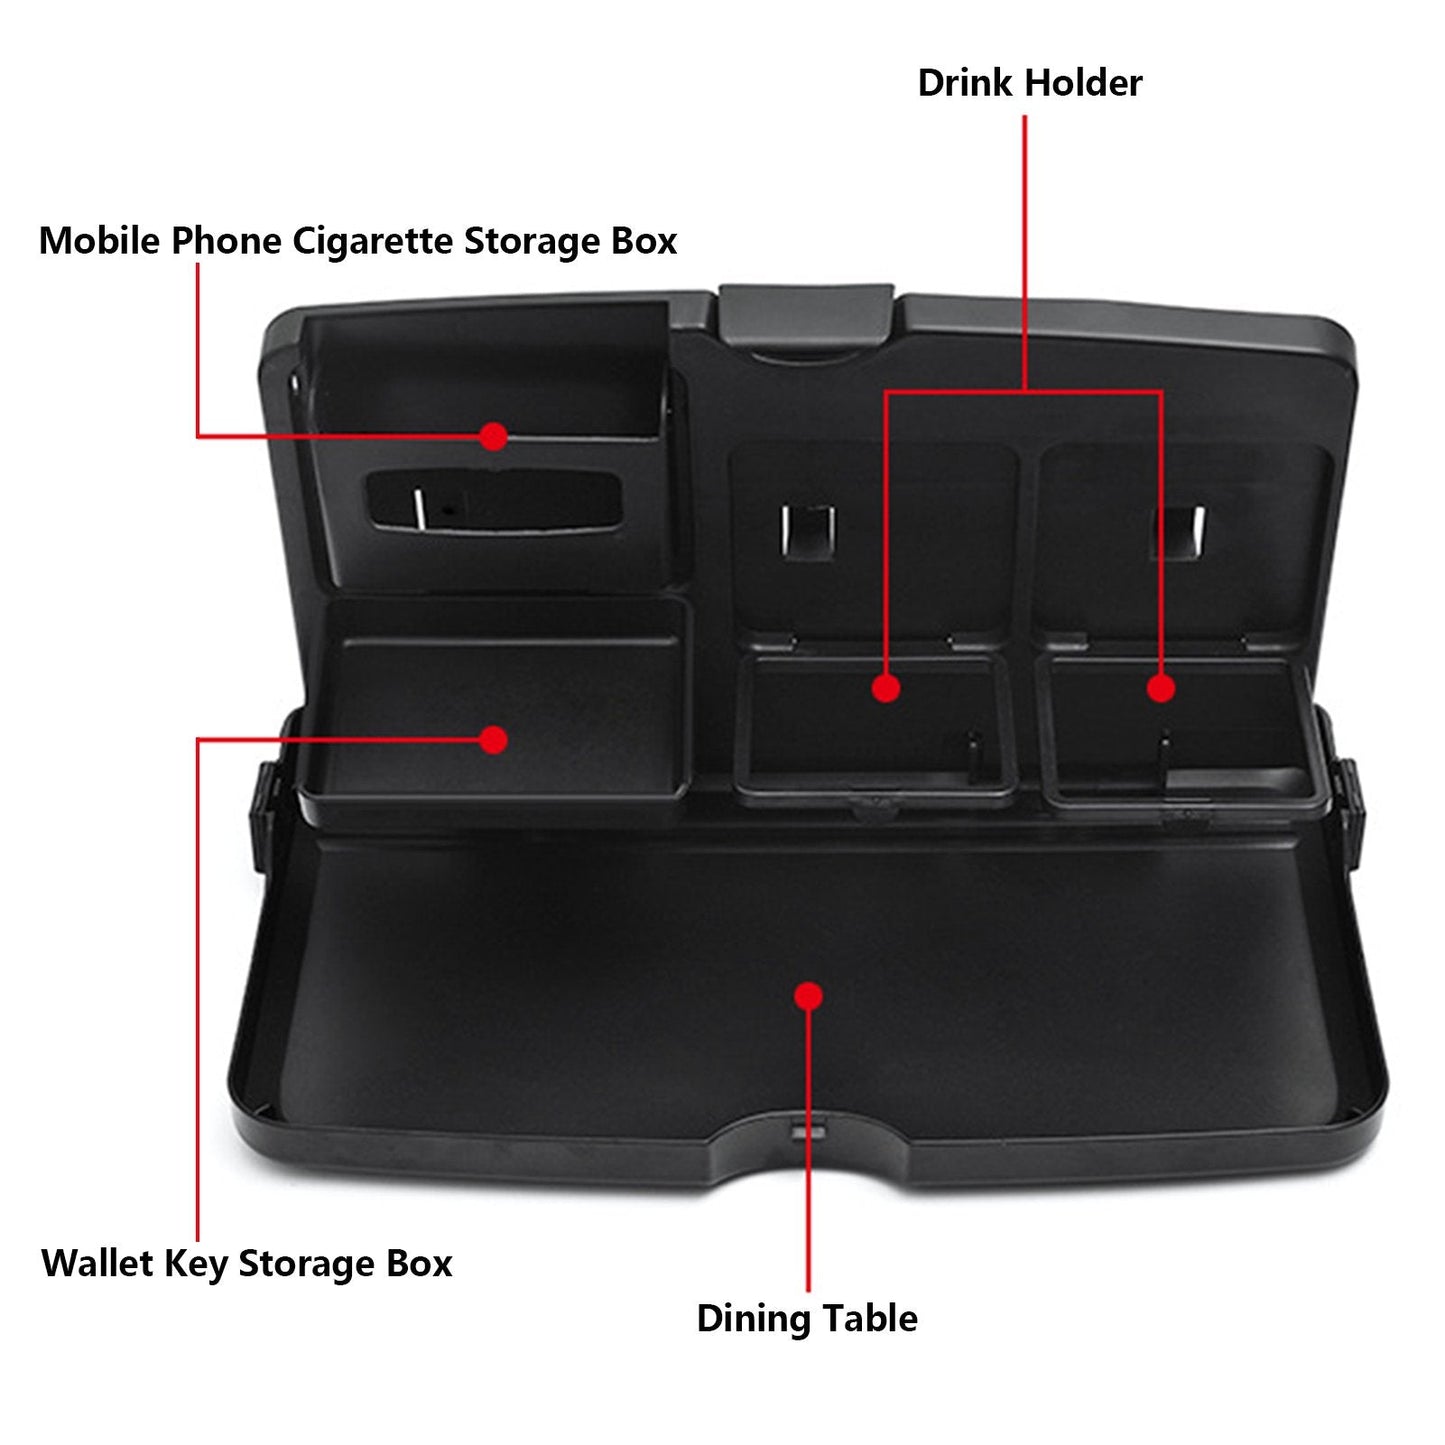 The multifunctional eating and drinking holder for maximum road comfort